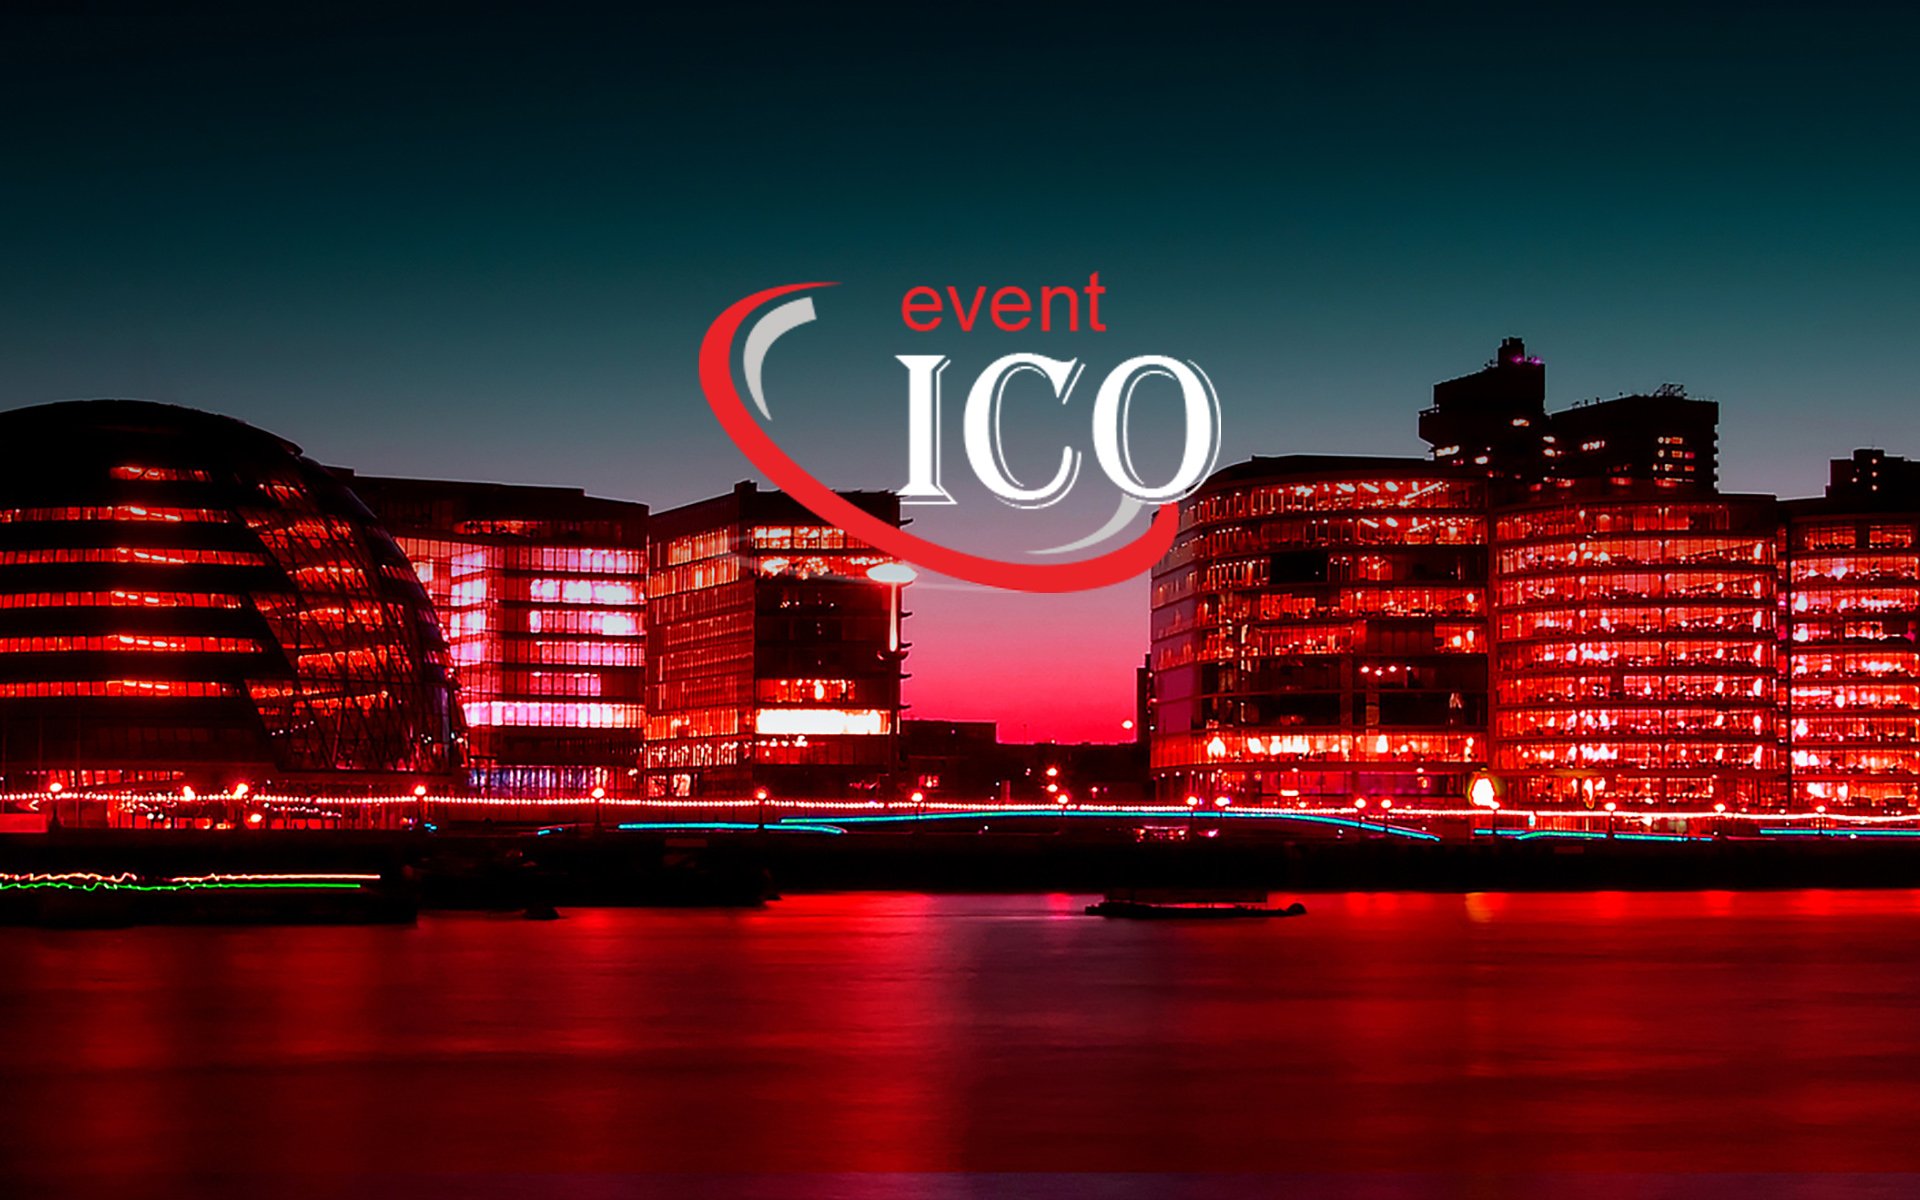 Capital Investment, Computer Games, Healthcare, Travelling - What Will be Showcased at ICO event London?